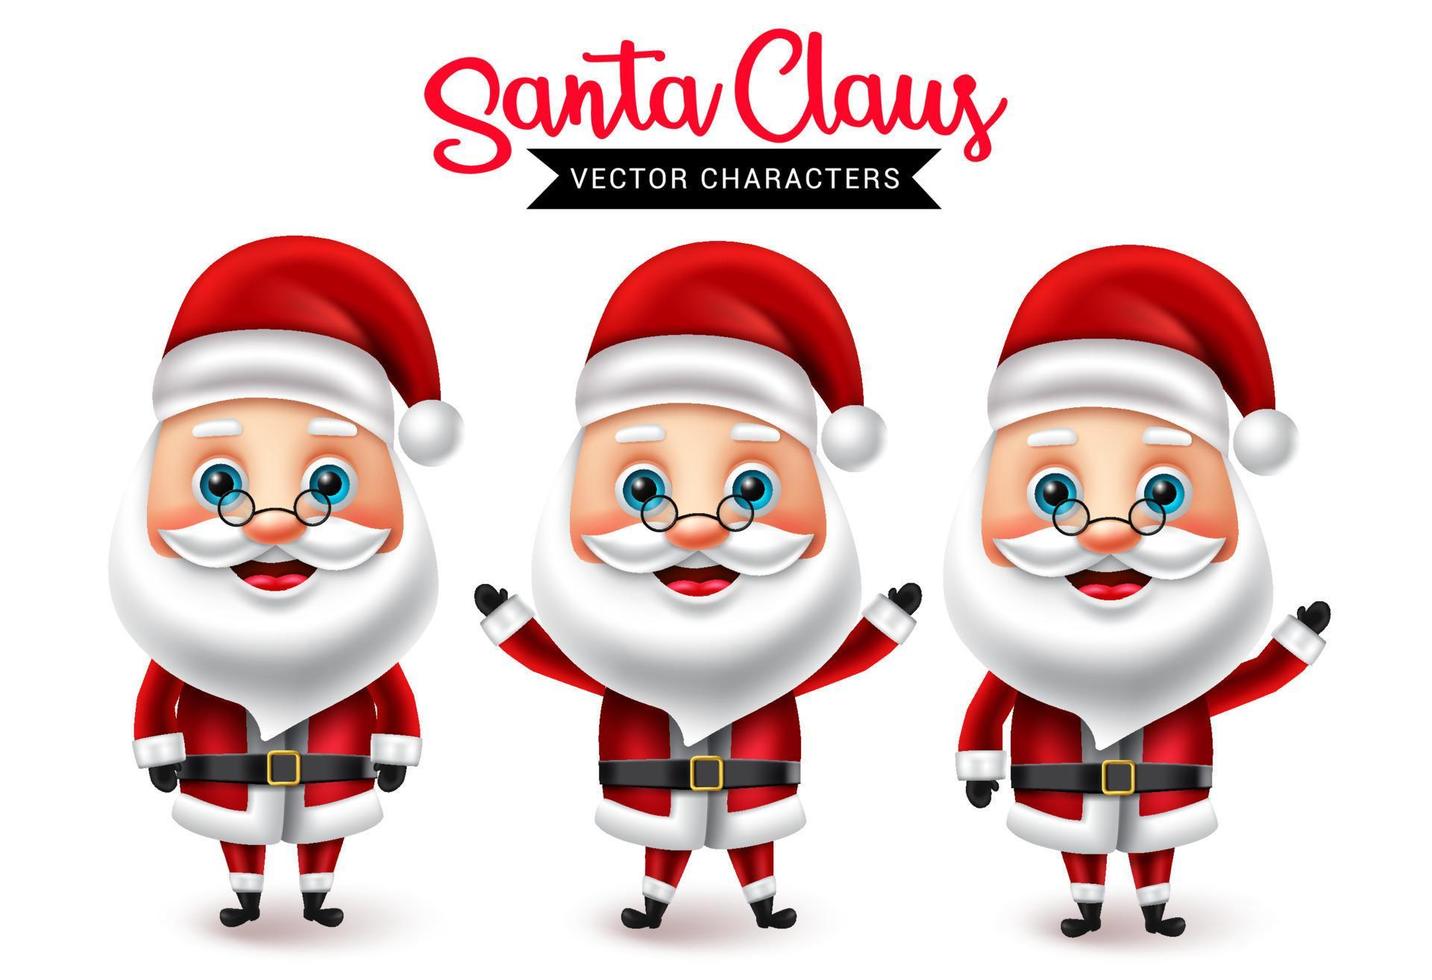 Santa claus christmas vector characters set. Santa claus cute 3d character in standing and waving pose and gestures for xmas holiday season collection element design. Vector illustration